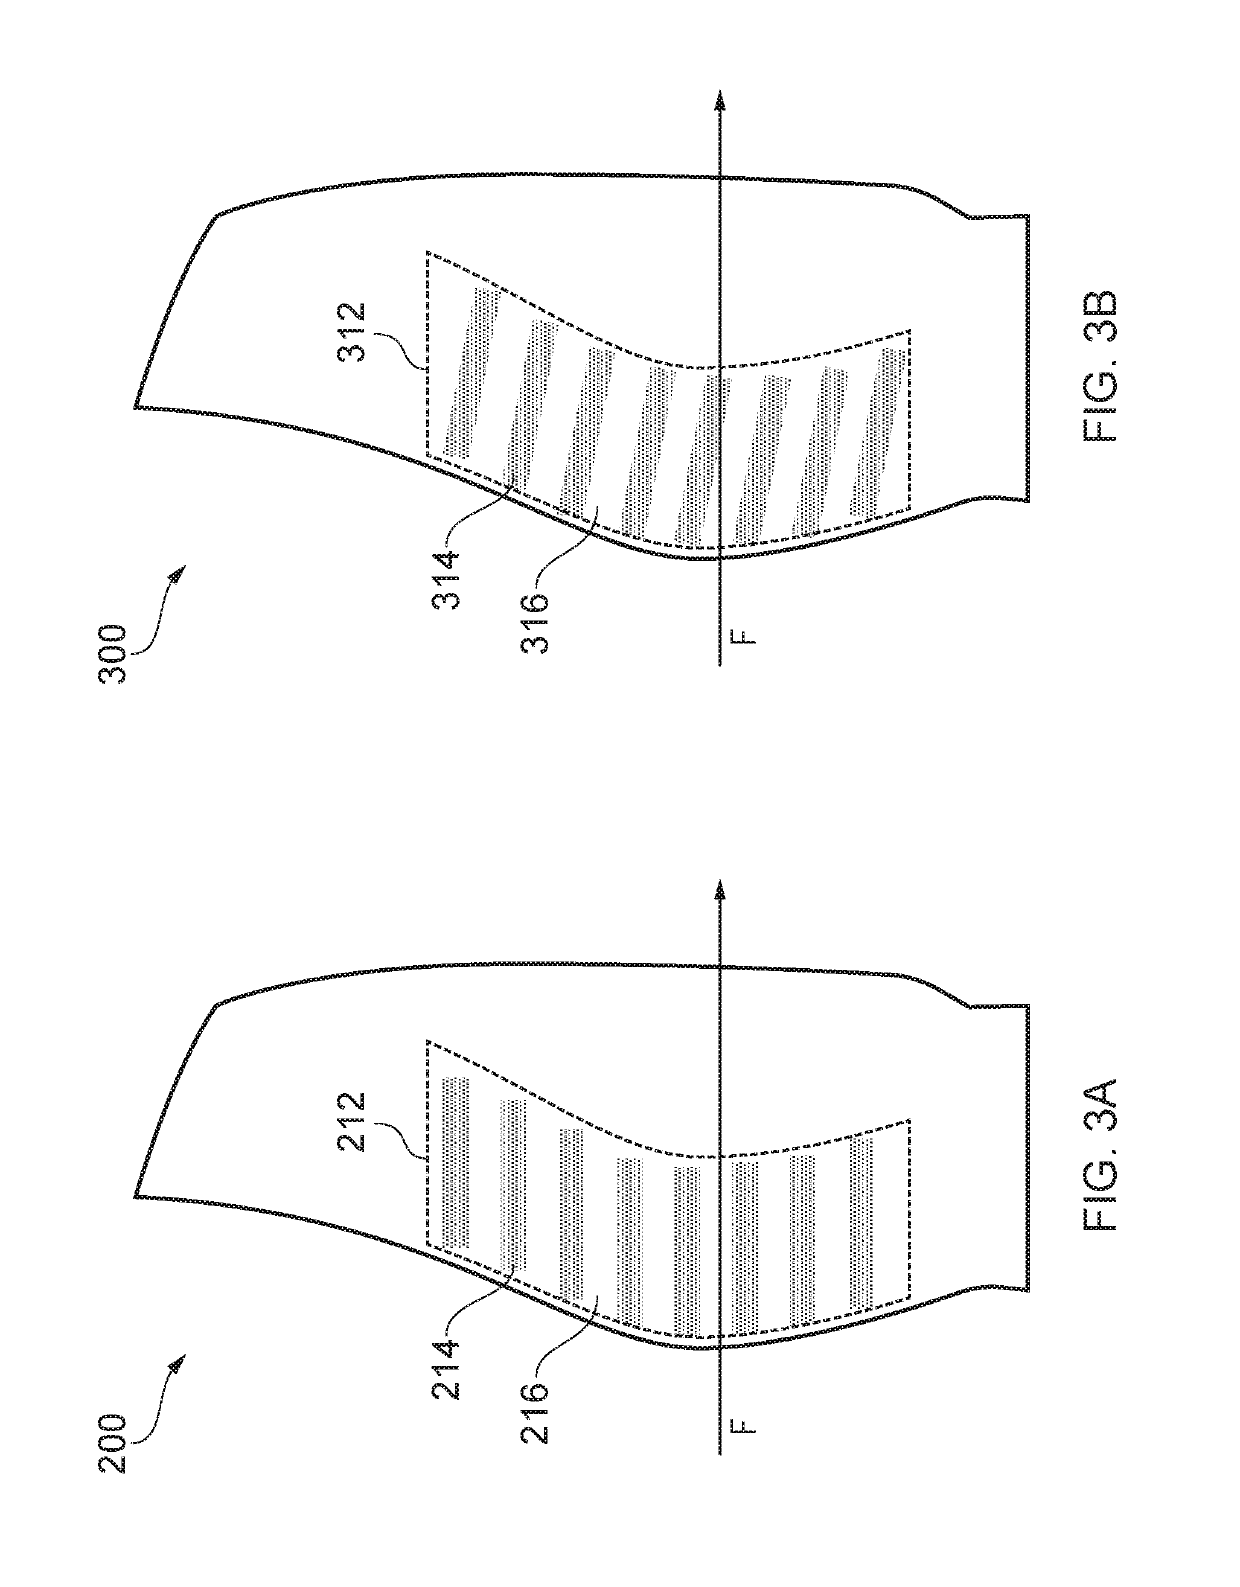 Blade or vane for a gas turbine engine